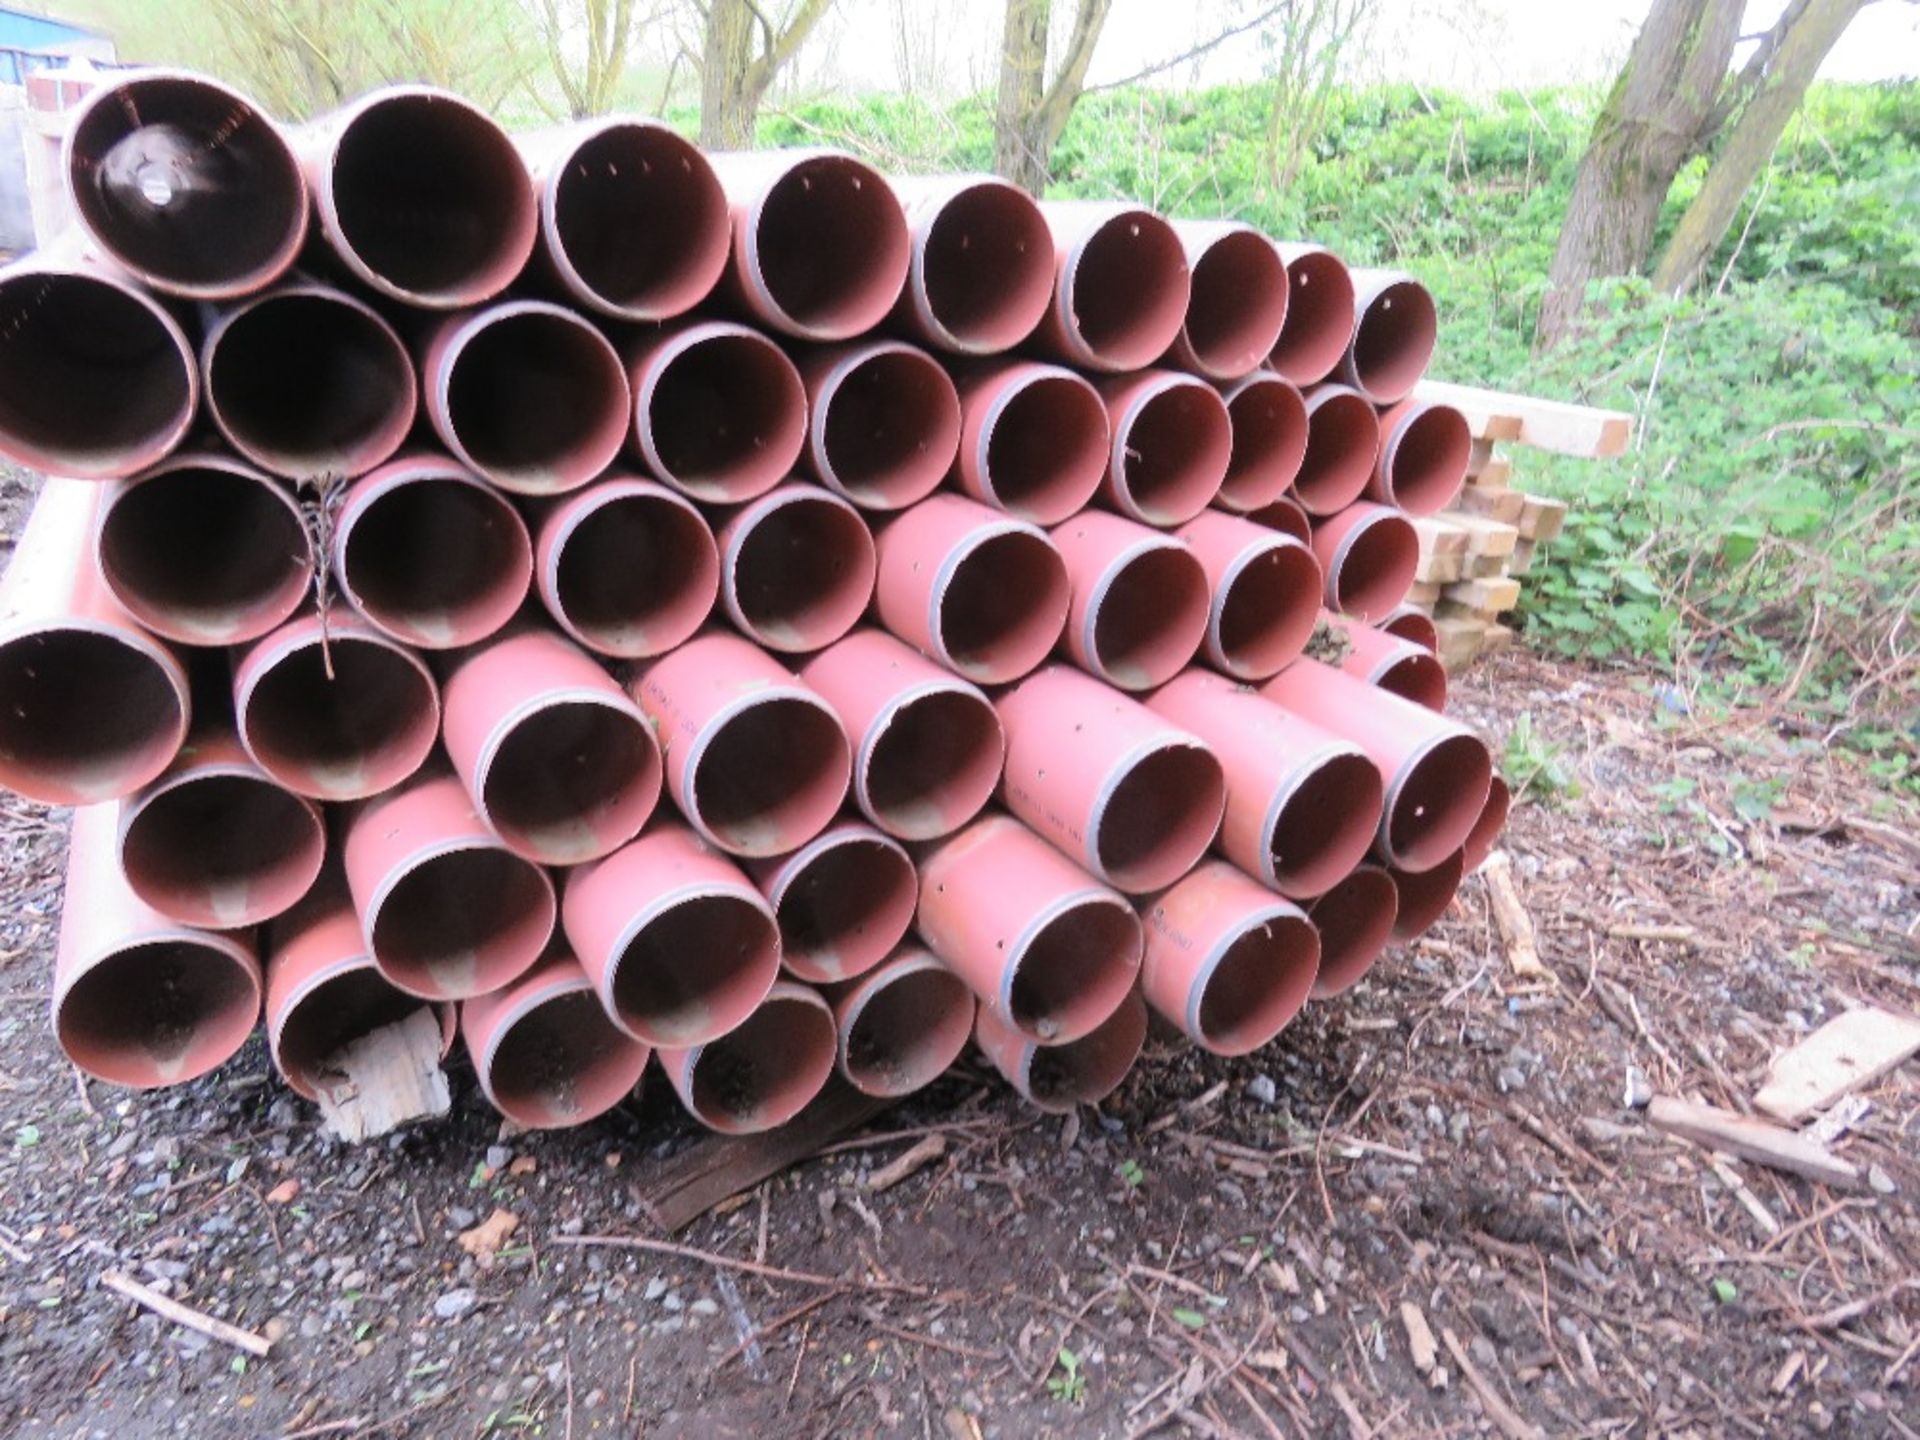 PACK OF POLYPIPE DRAINAGE PIPE WITH WEAPER HOLES 110MM PVC-U 6.05M LENGTH, 57NO LENGTHS IN TOTAL APP - Image 2 of 4